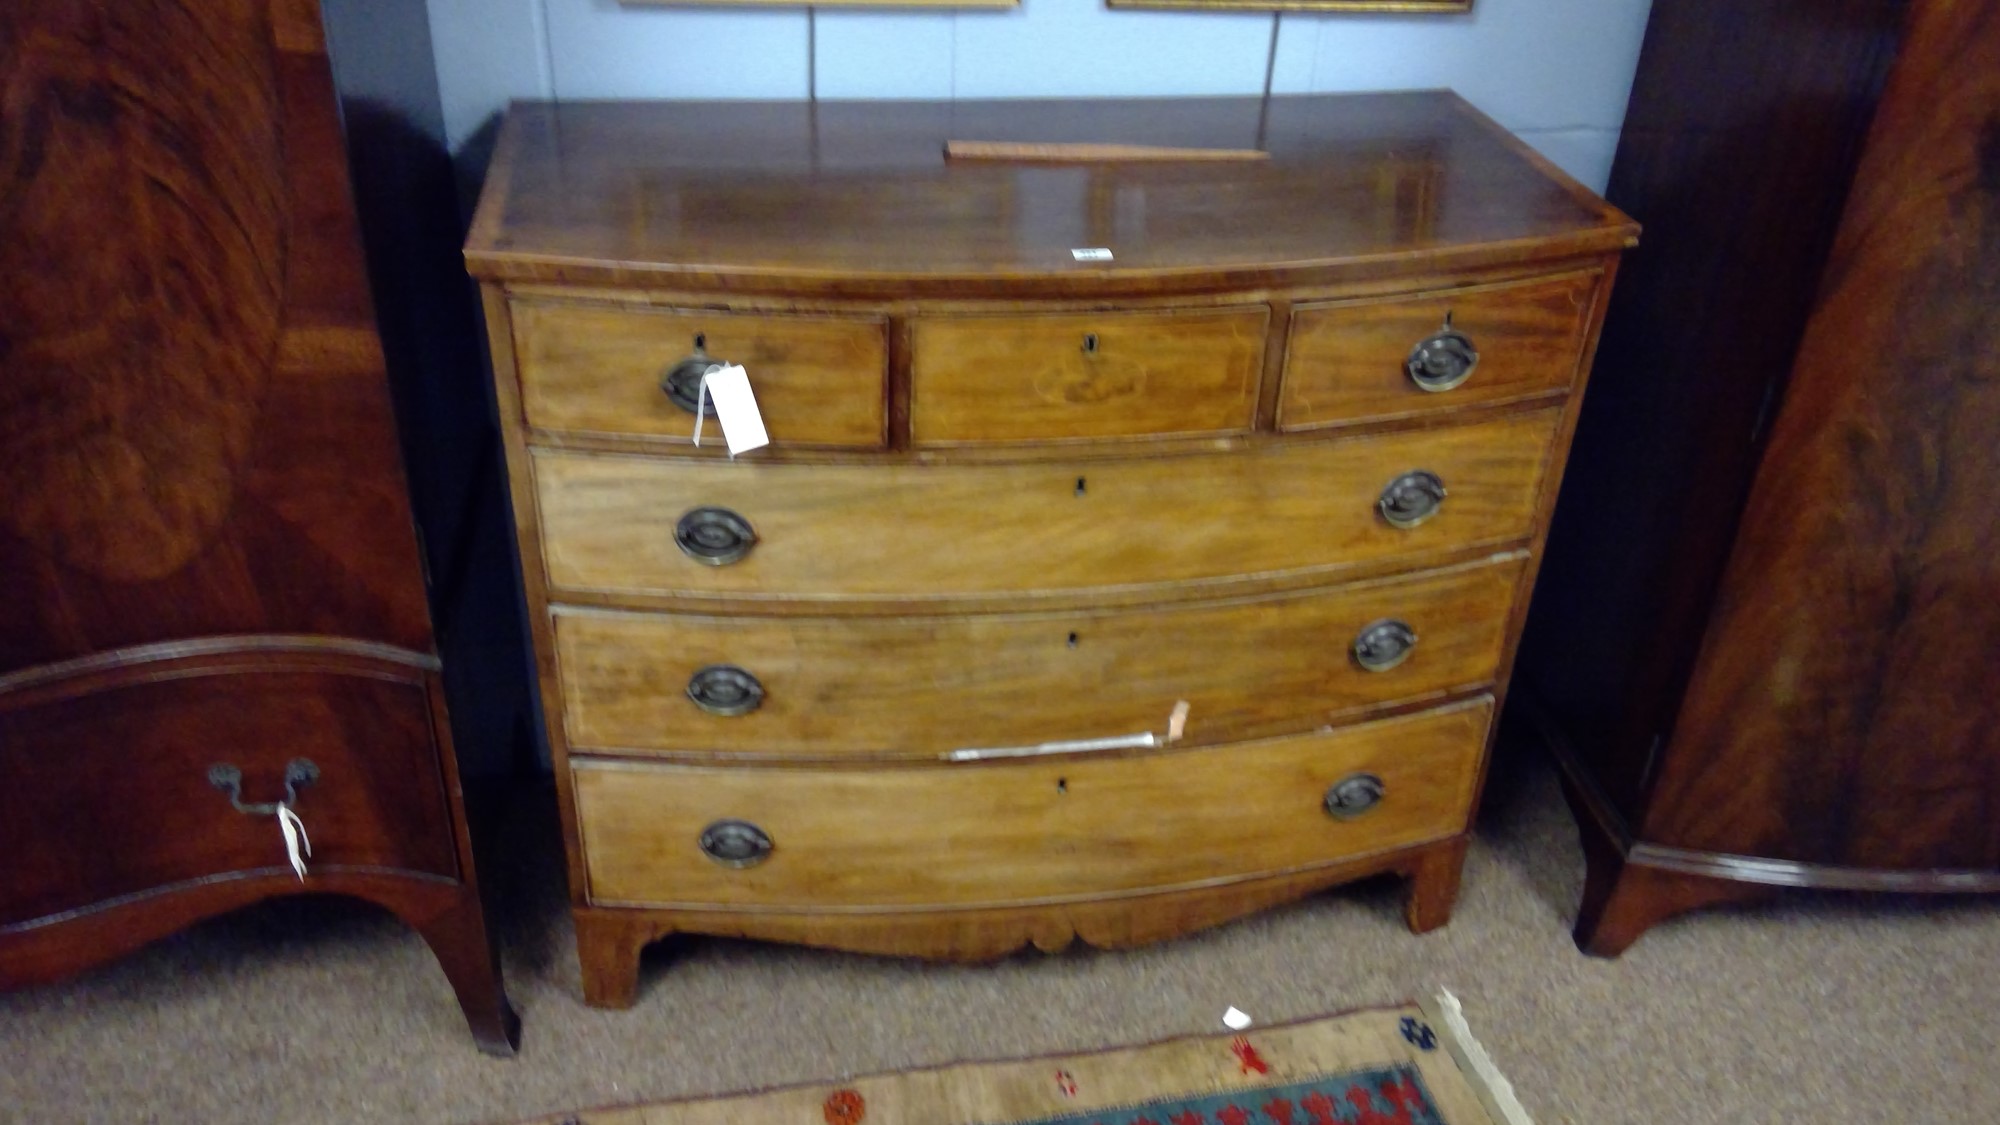 Regency bowfront chest of drawers